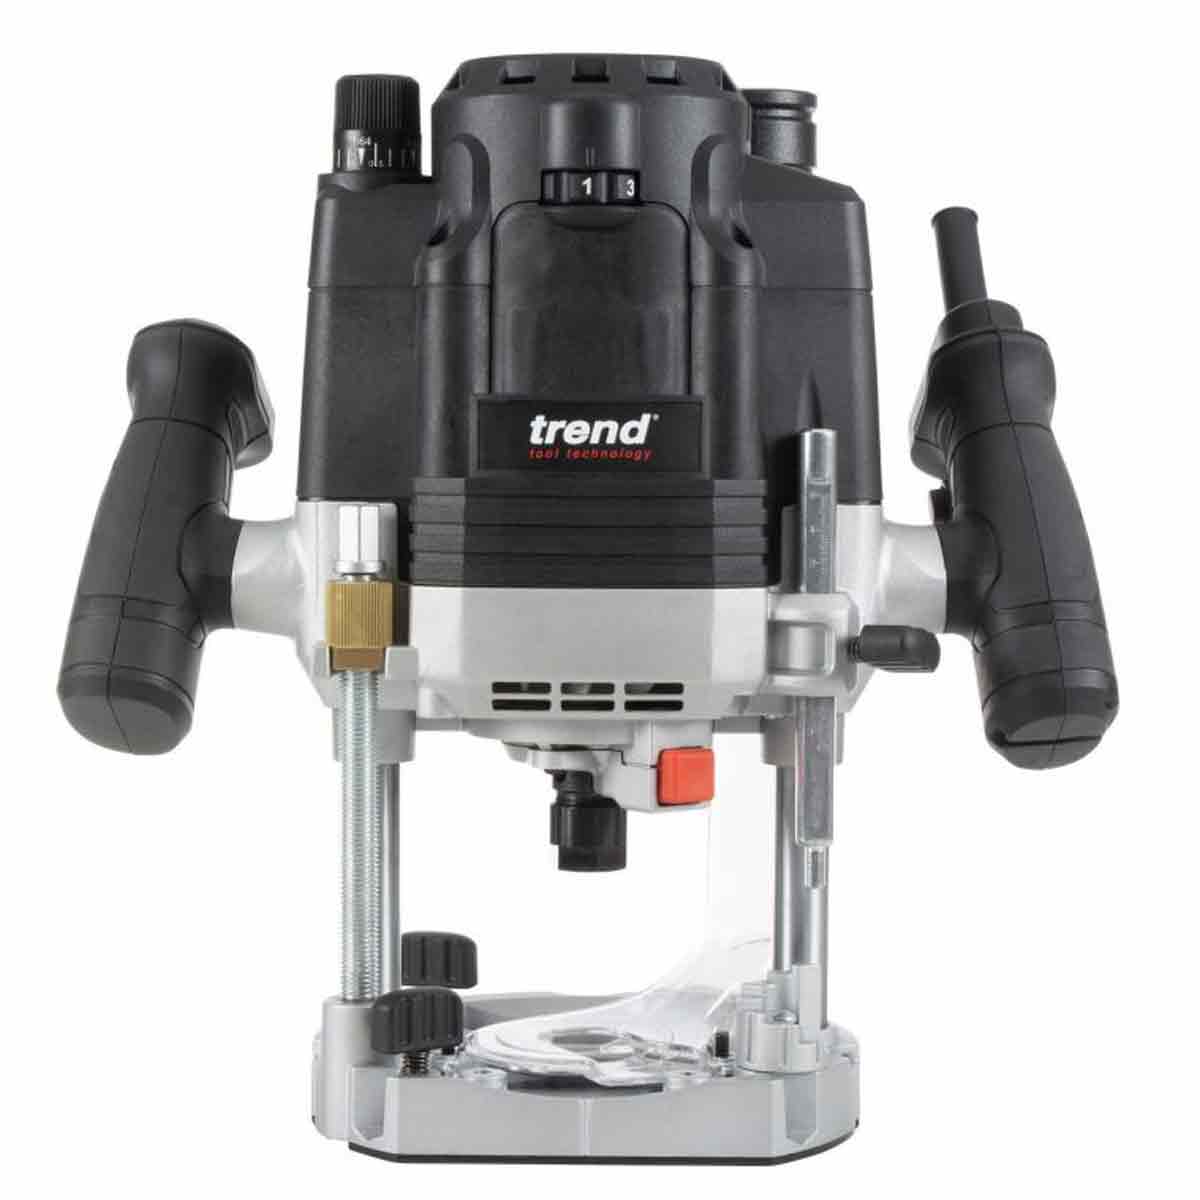 Trend T8EK 1/2in Dual Mode Plunge Router 2200W 240V With Carry Case